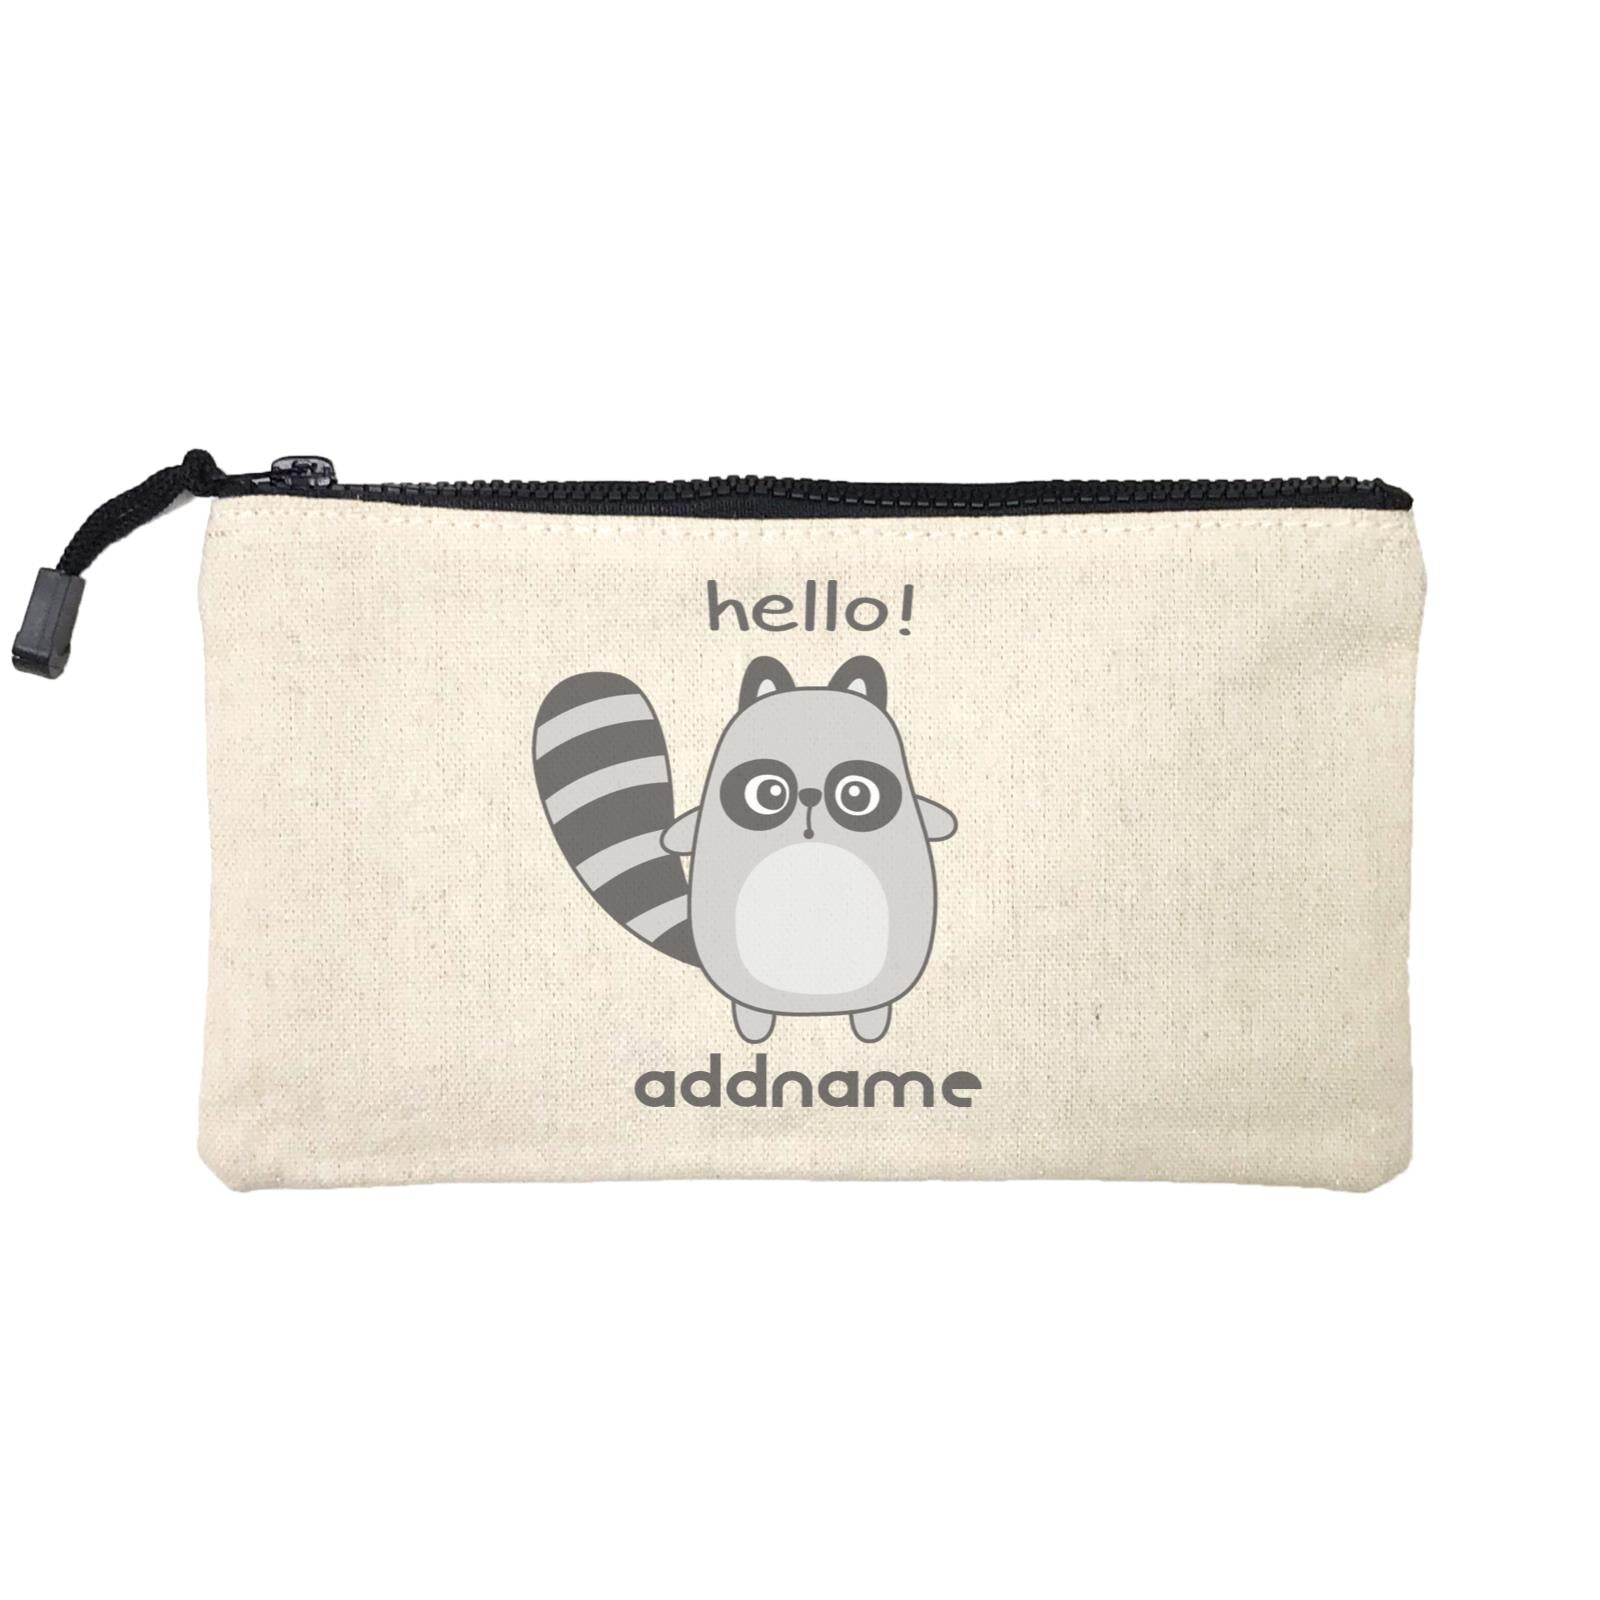 Cool Cute Animals Racoon Hello Addname Mini Accessories Stationery Pouch